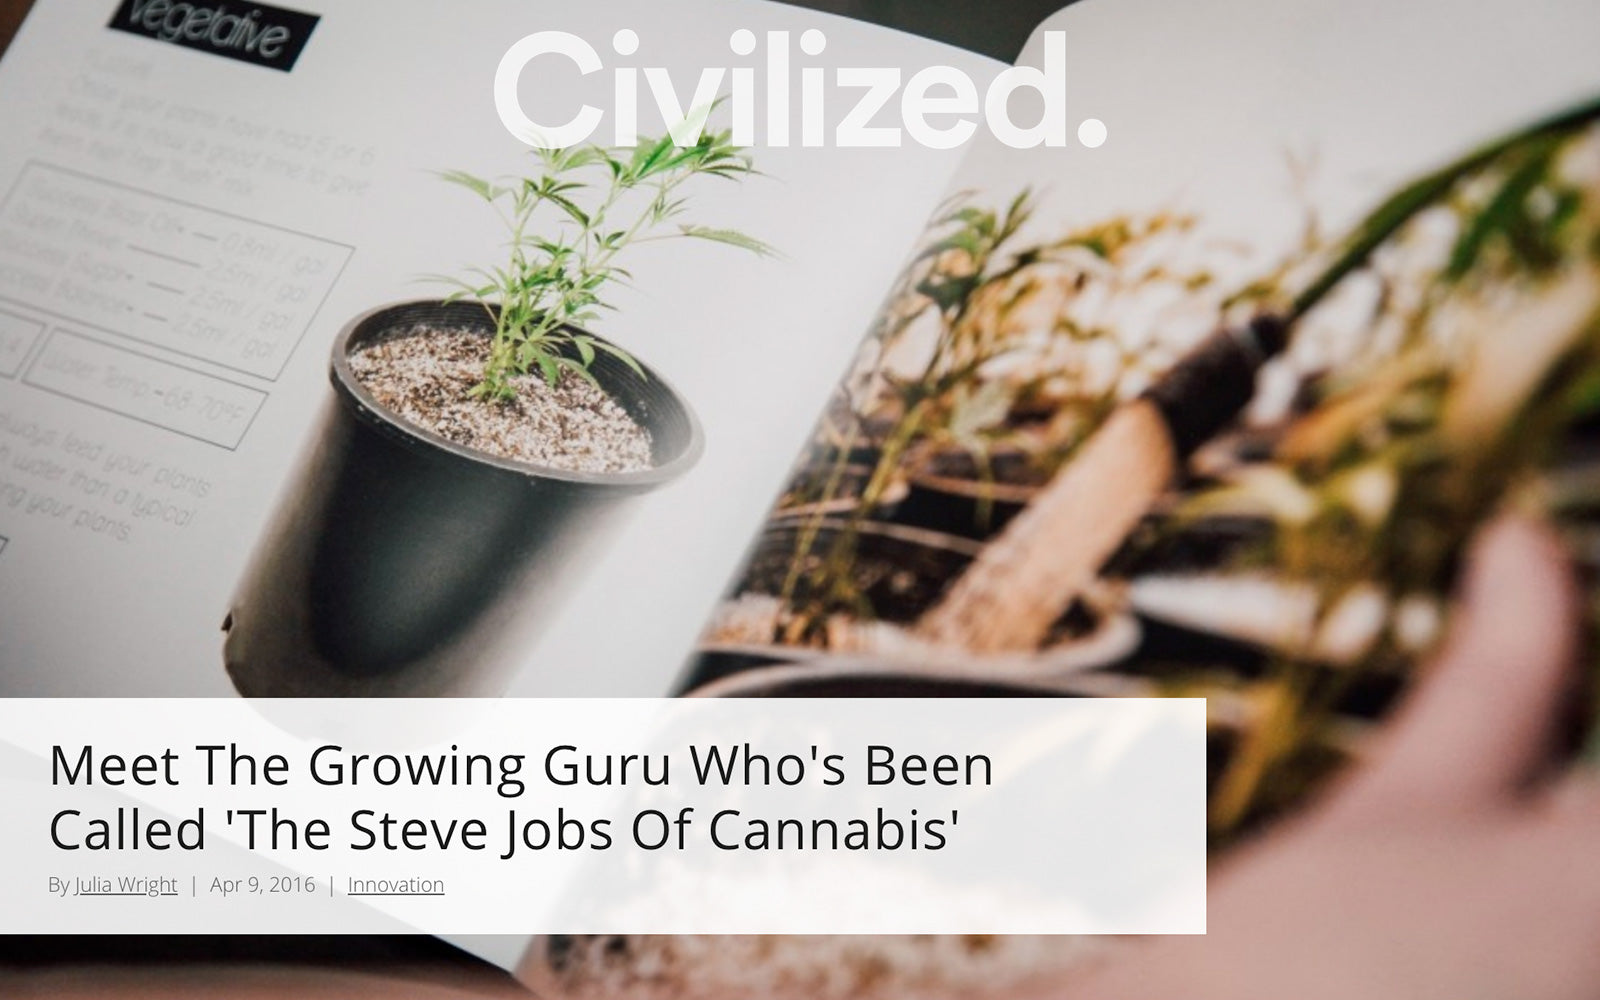 Civilized.life - Meet The Growing Guru Who's Been Called 'The Steve Jobs Of Cannabis'